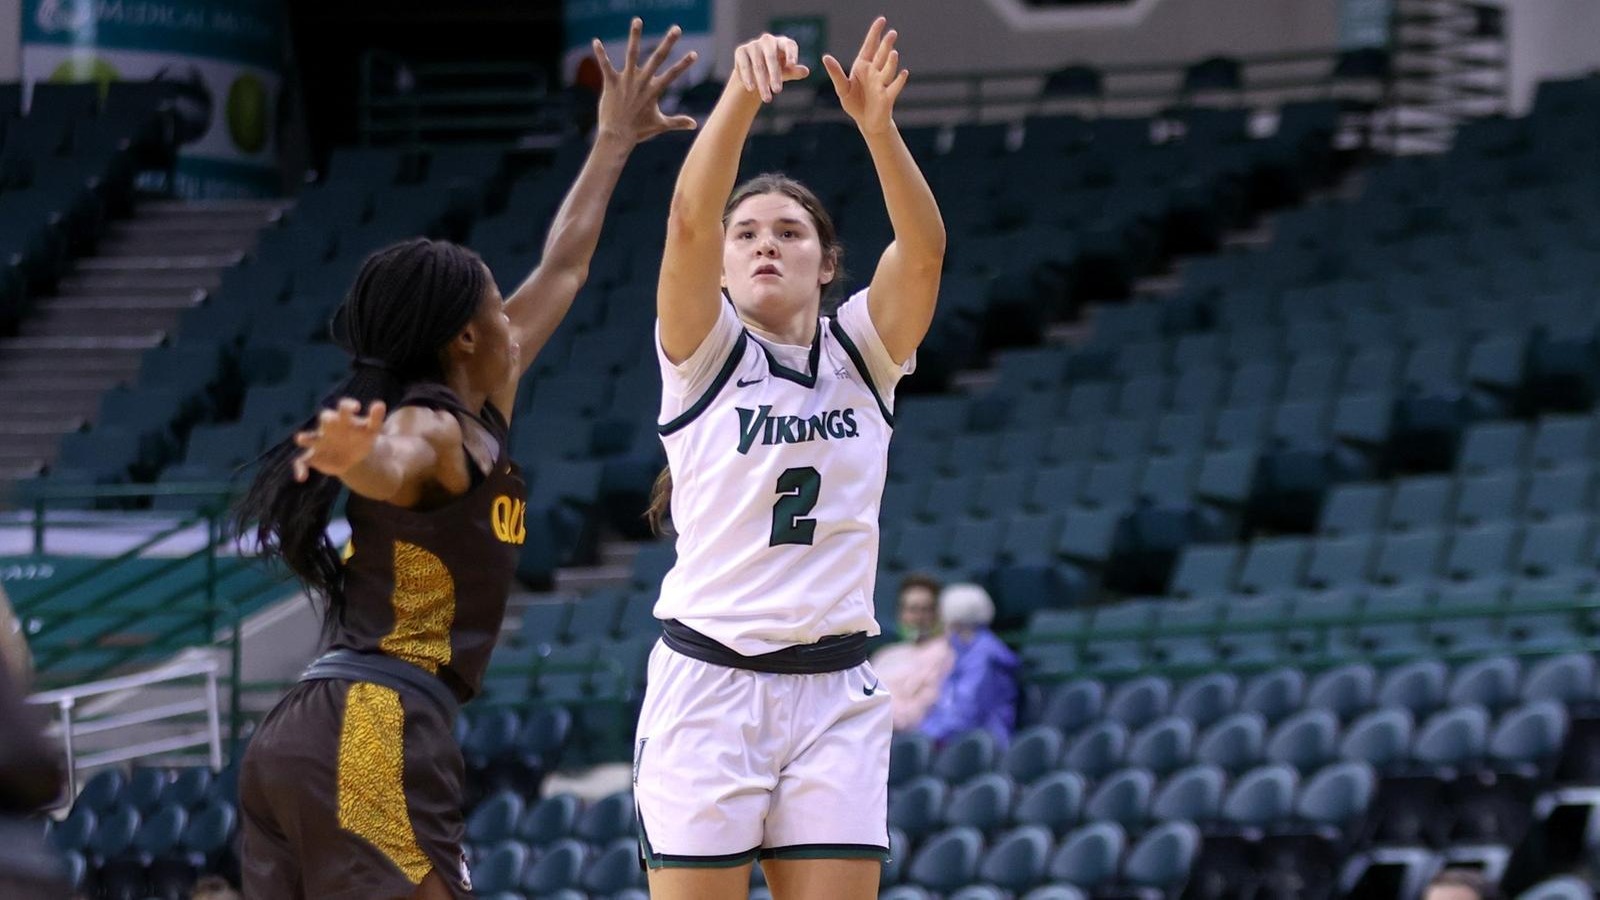 Cleveland State Women’s Basketball Improves To 3-0 With 93-53 Victory Over Quincy